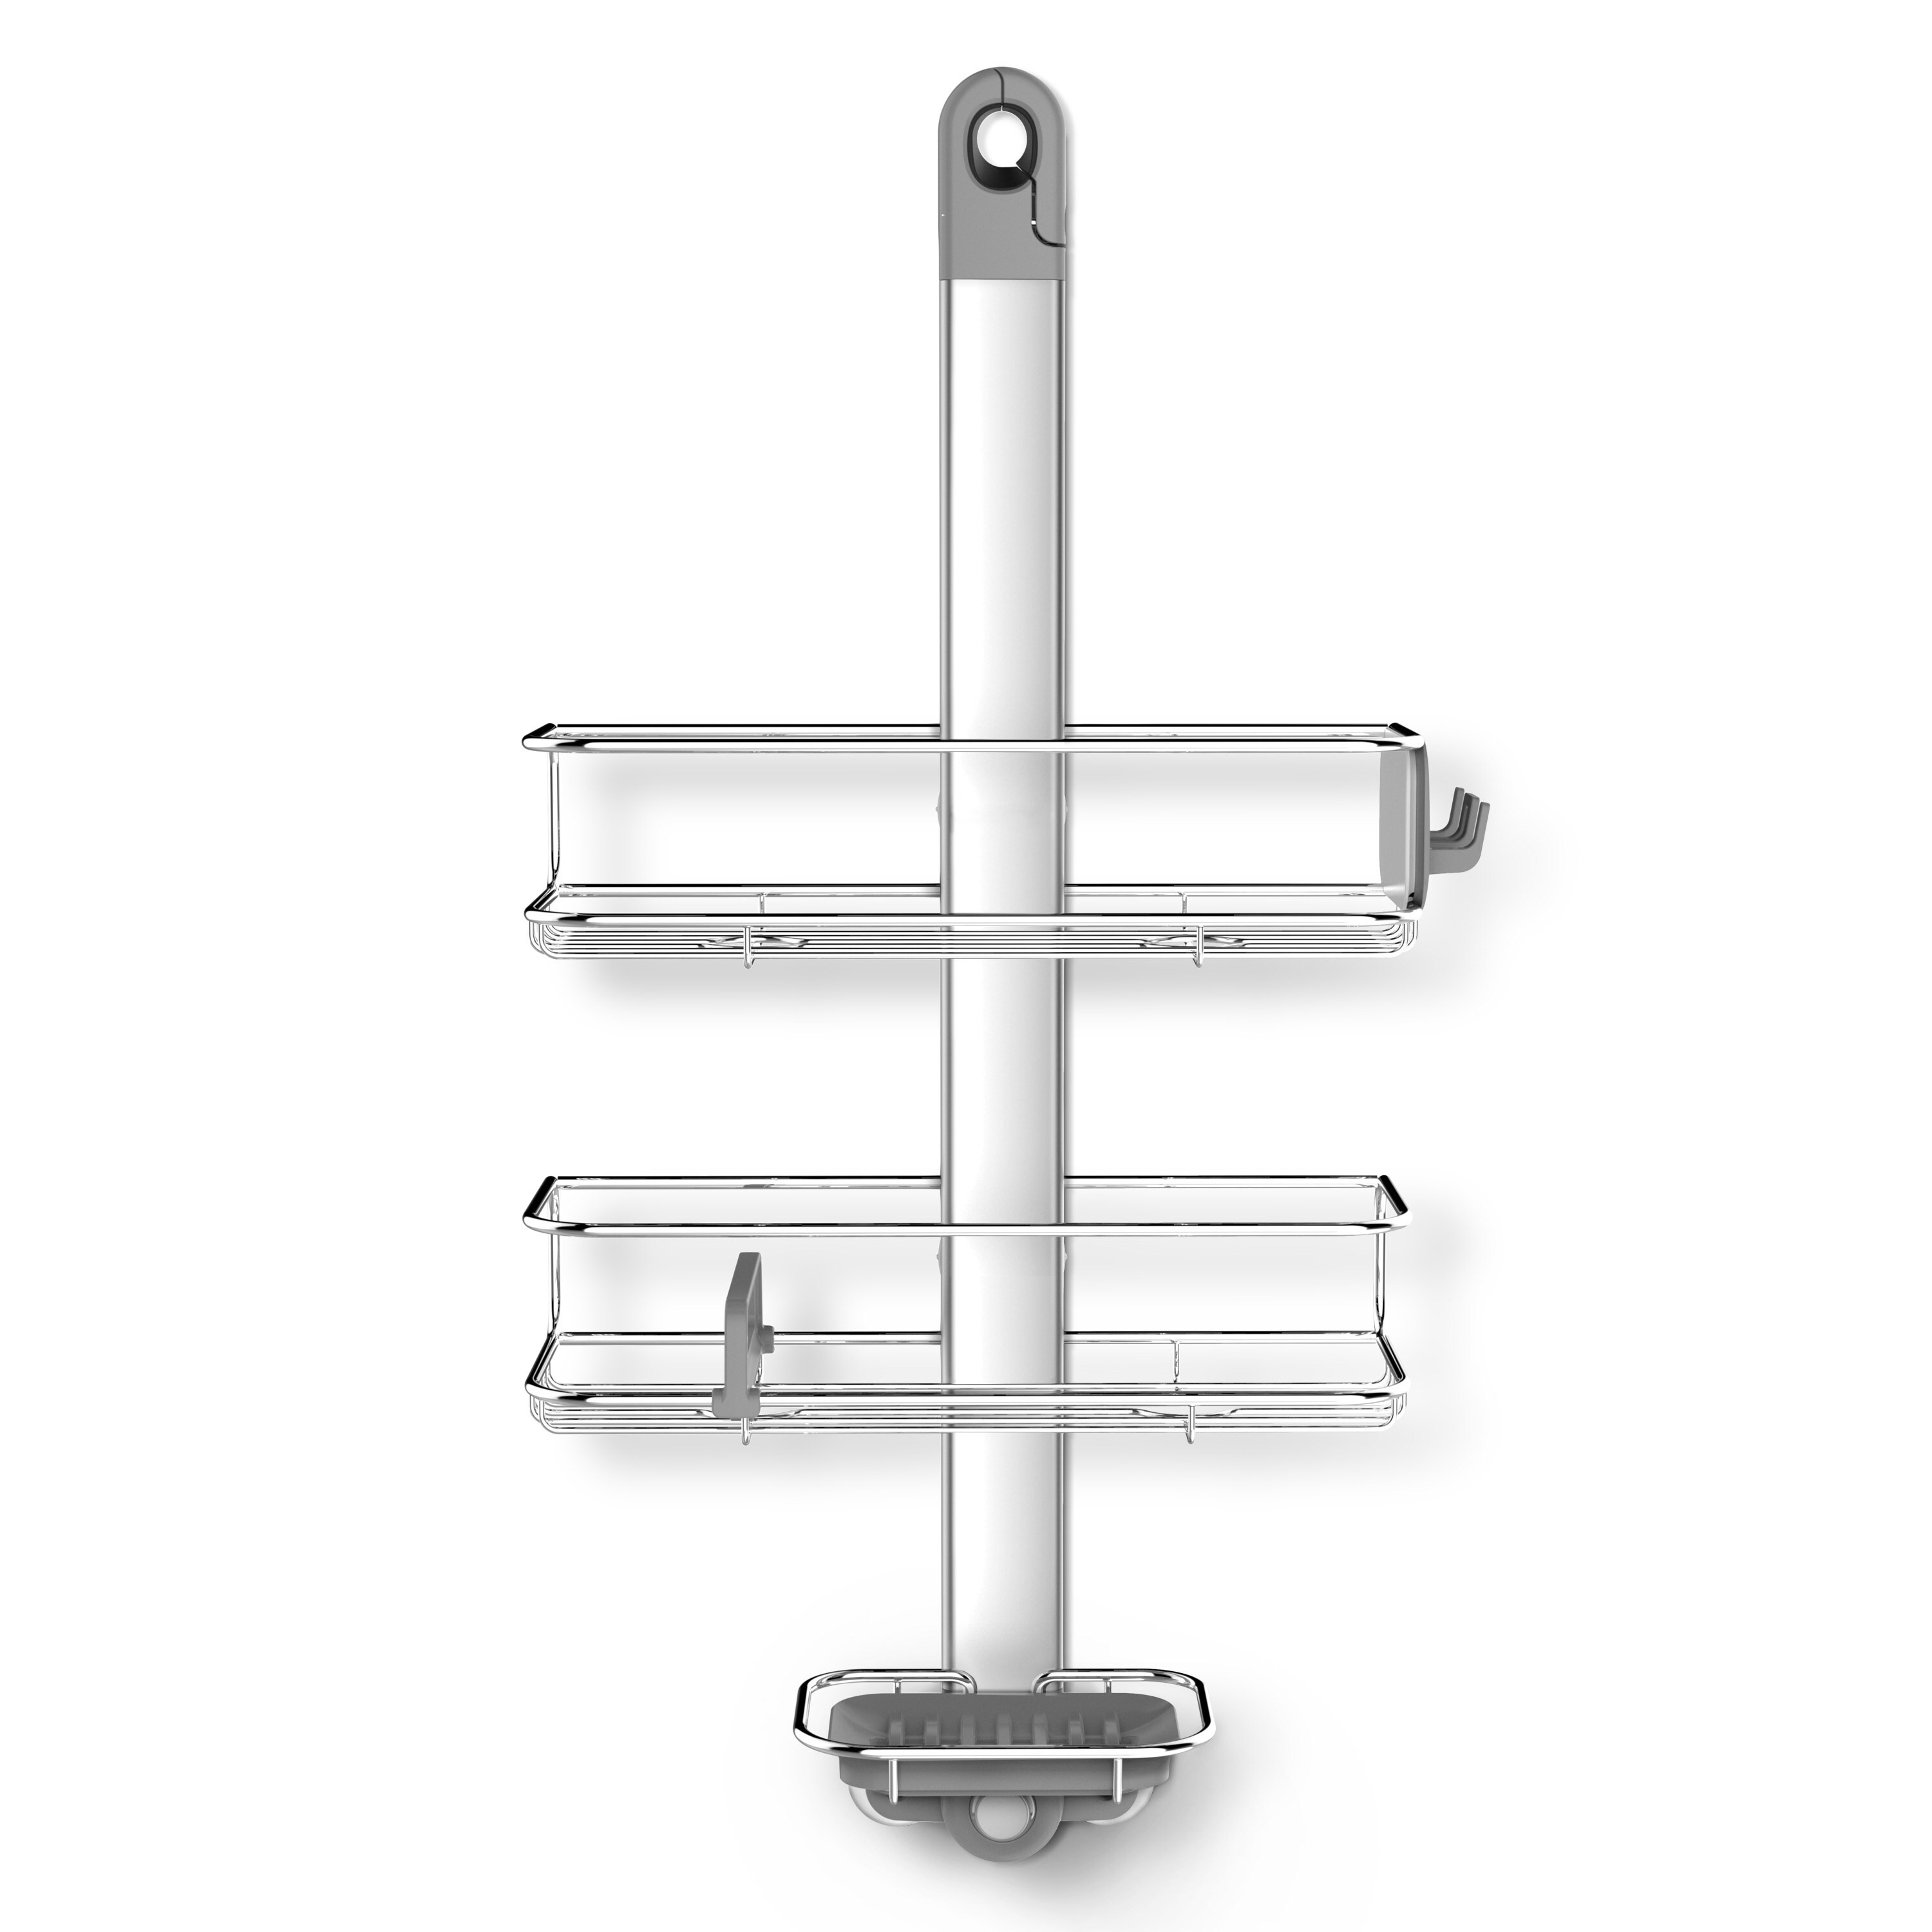 simplehuman on X: Introducing the over door shower caddy. A